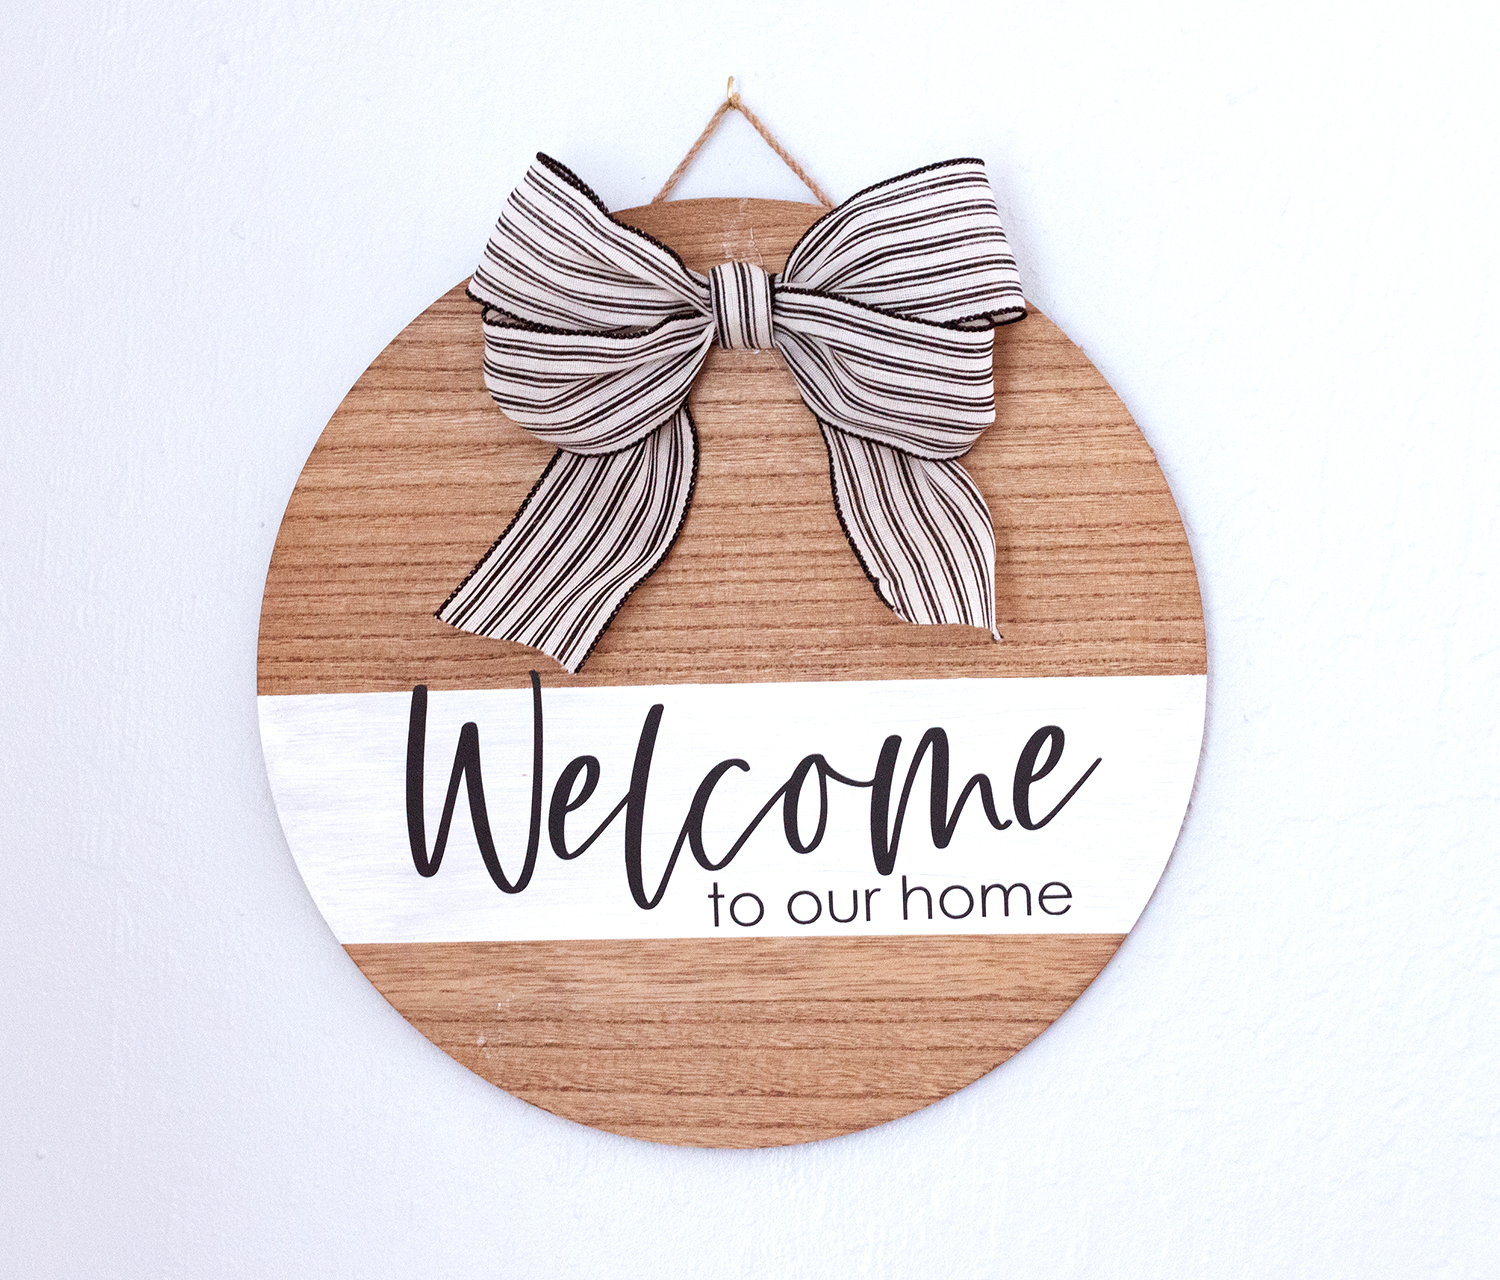 DIY Welcome Sign Project + Printable Instructions